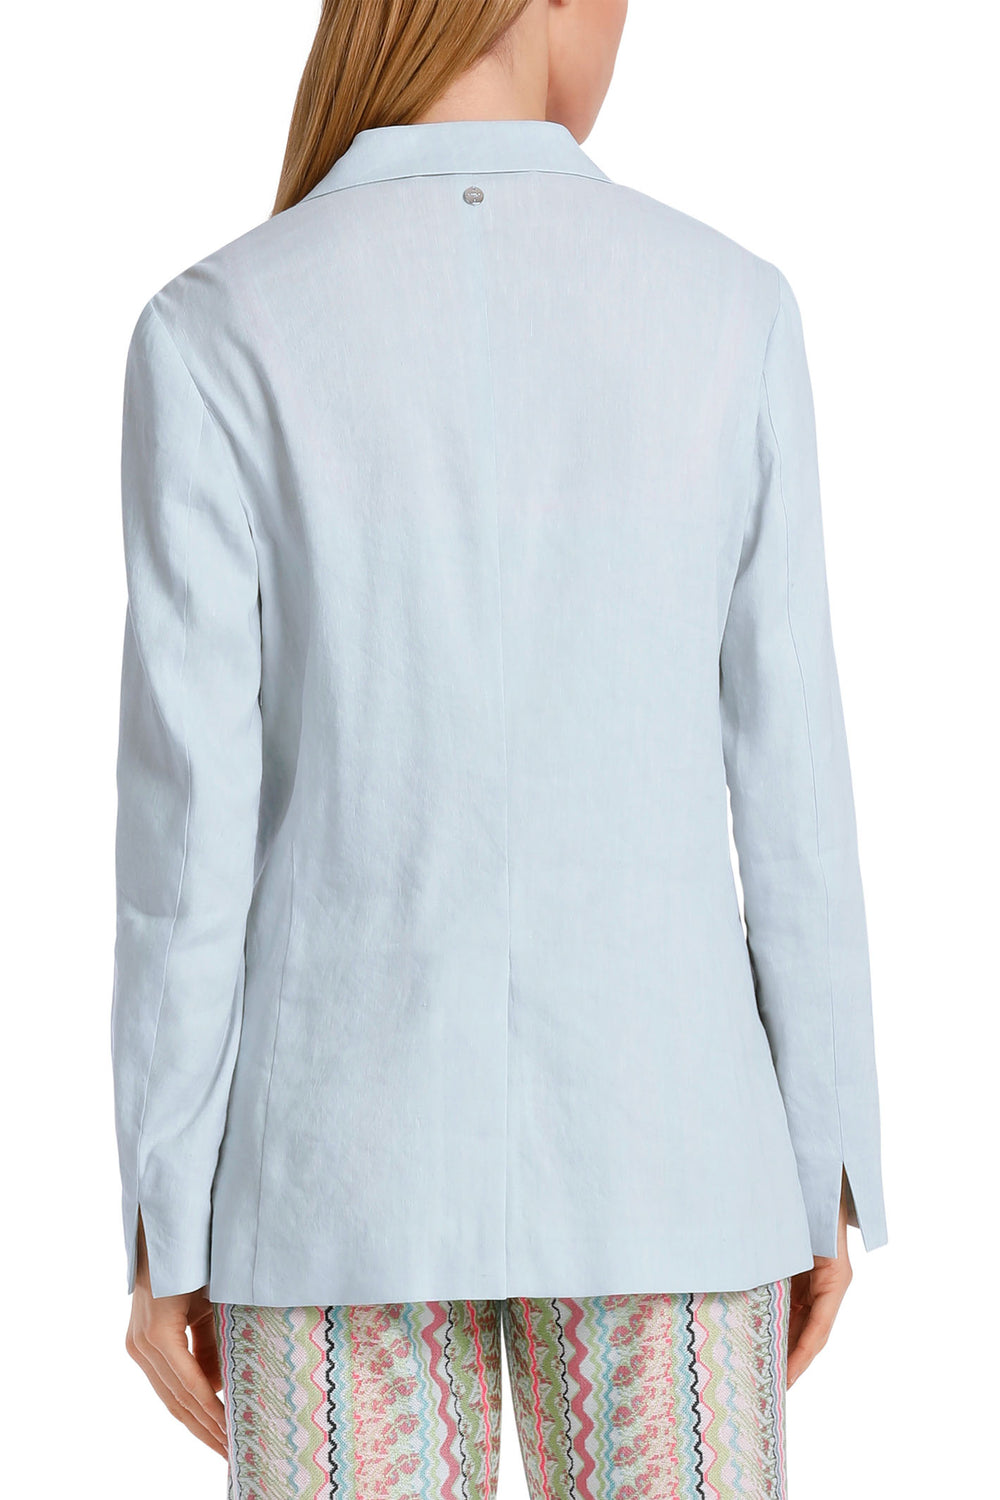 Marc Cain Collections WC 34.21 W47 302 Smoky Ice Blue Linen Mix Jacket - Olivia Grace Fashion